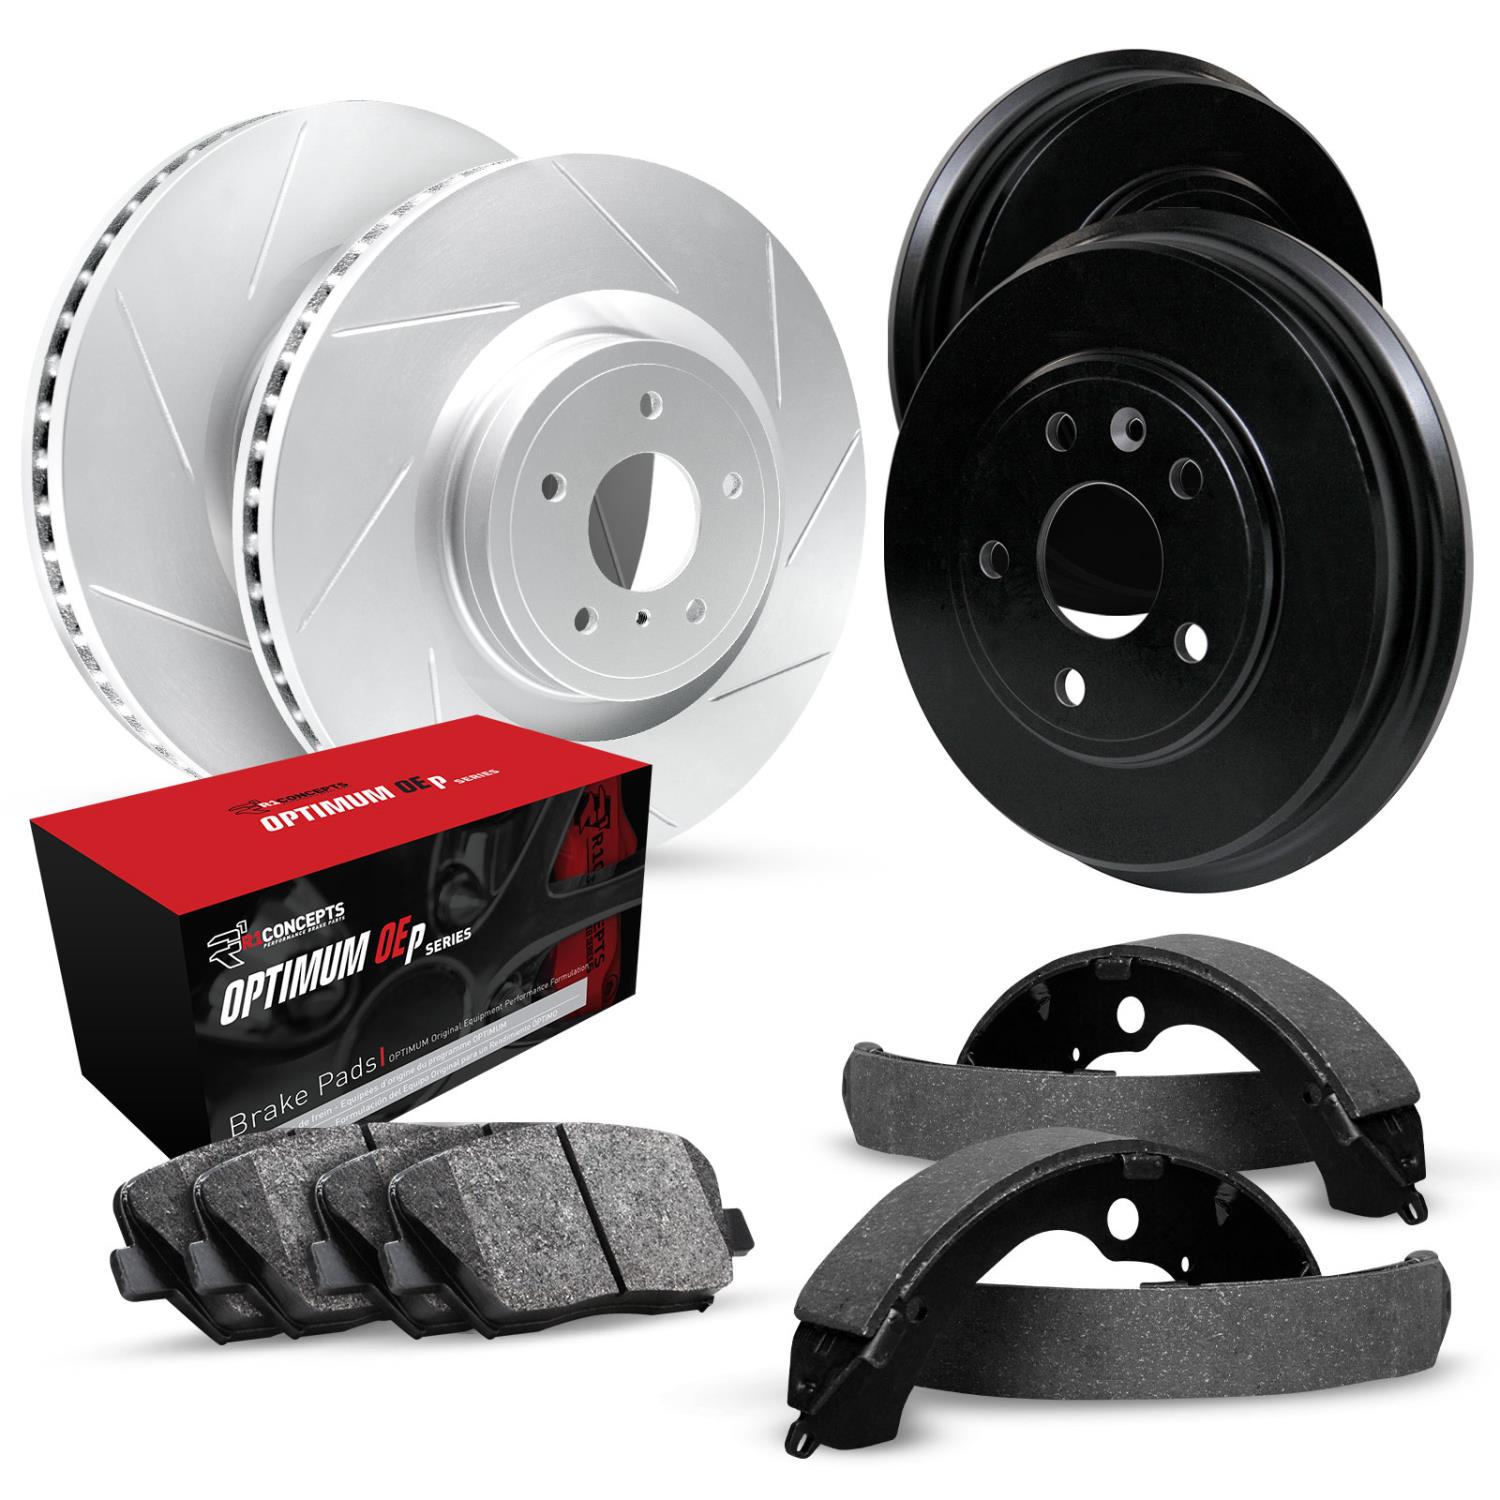 GEO-Carbon Slotted Brake Rotor & Drum Set w/Optimum OE Pads & Shoes, 2003-2005 GM, Position: Front & Rear